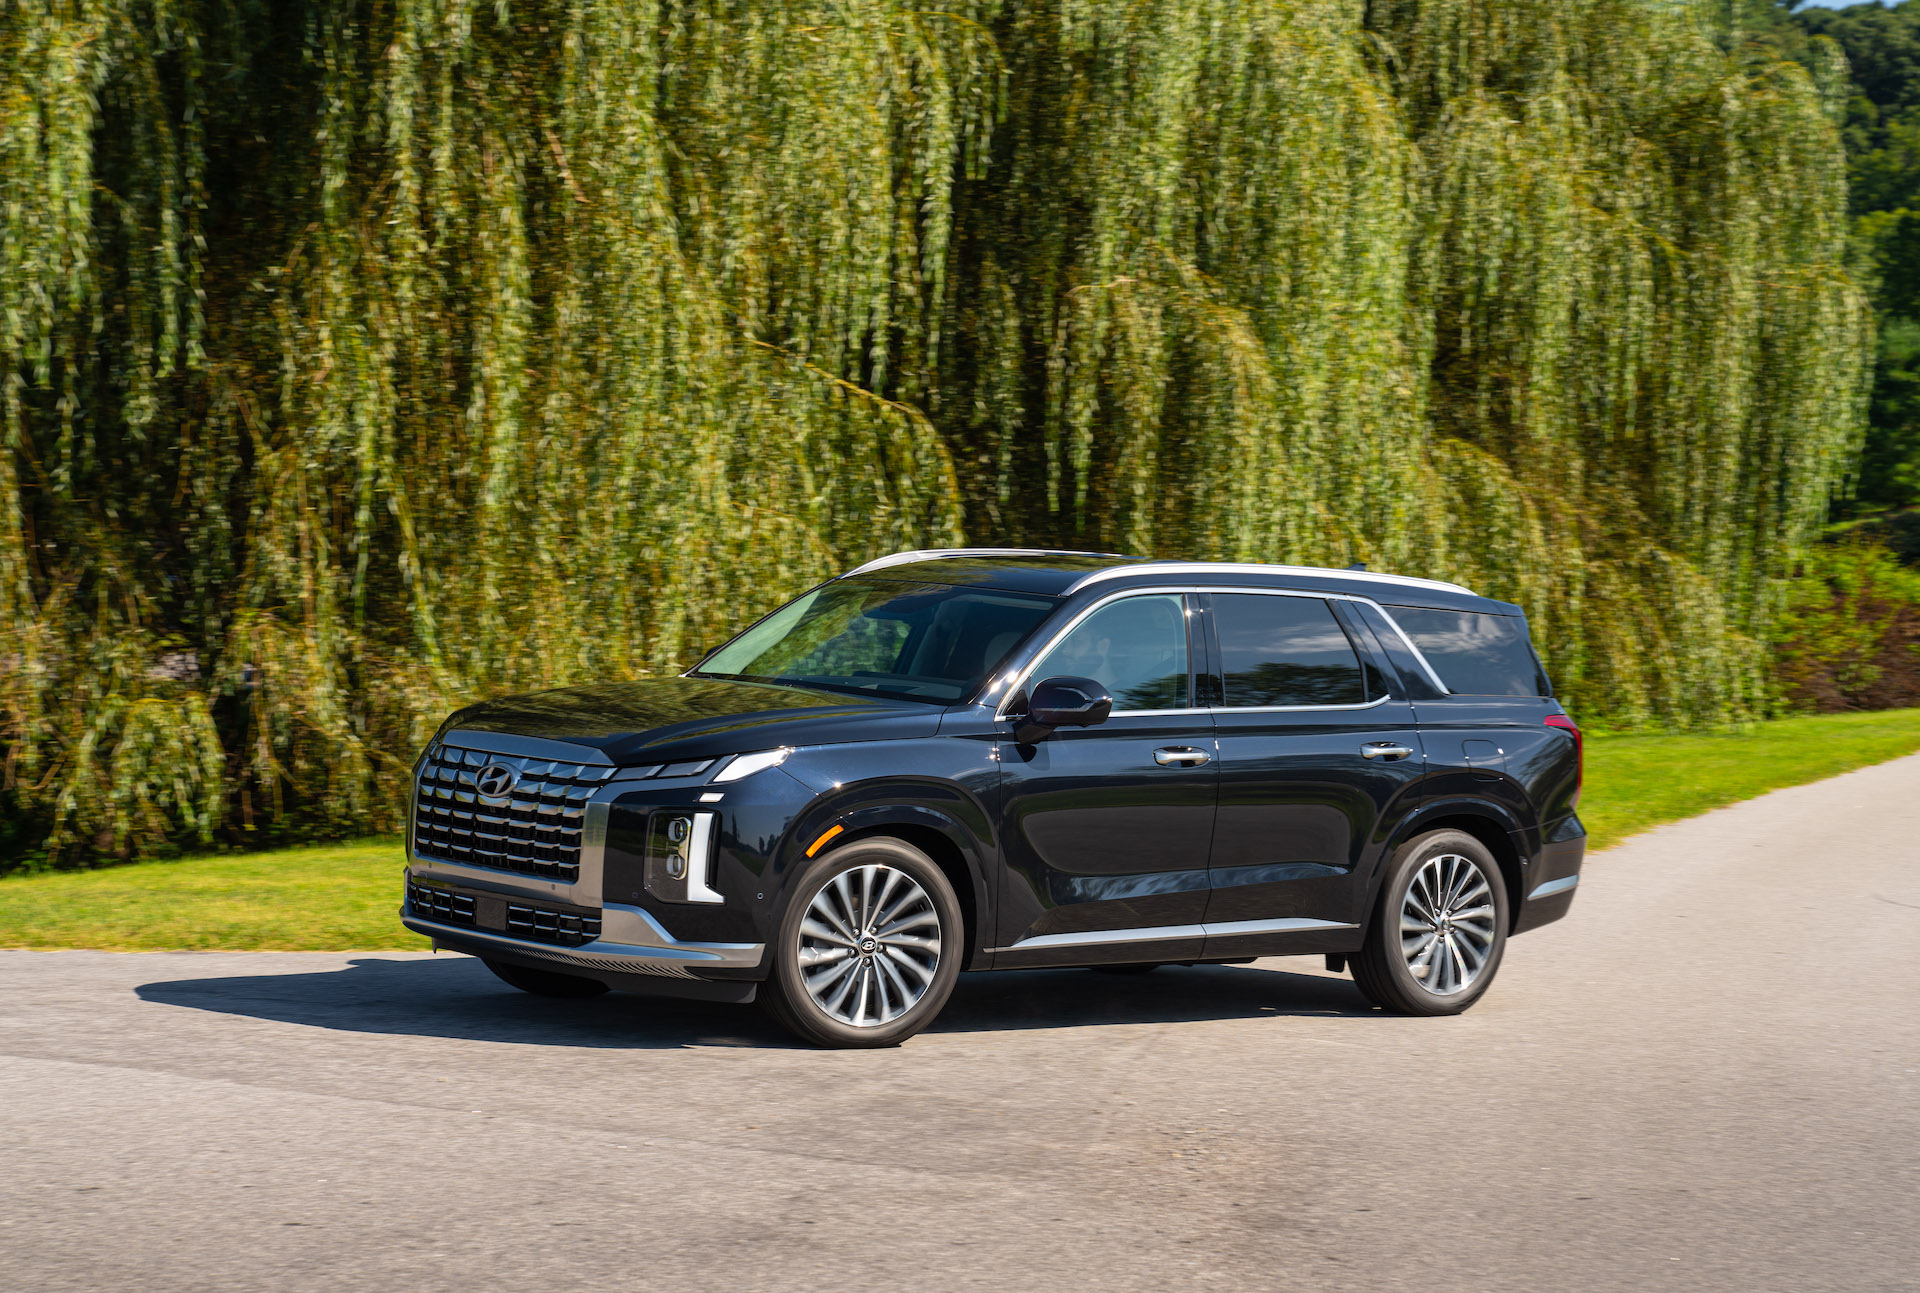 2021 Hyundai Palisade SUV Arrives In Australia Being Planned For